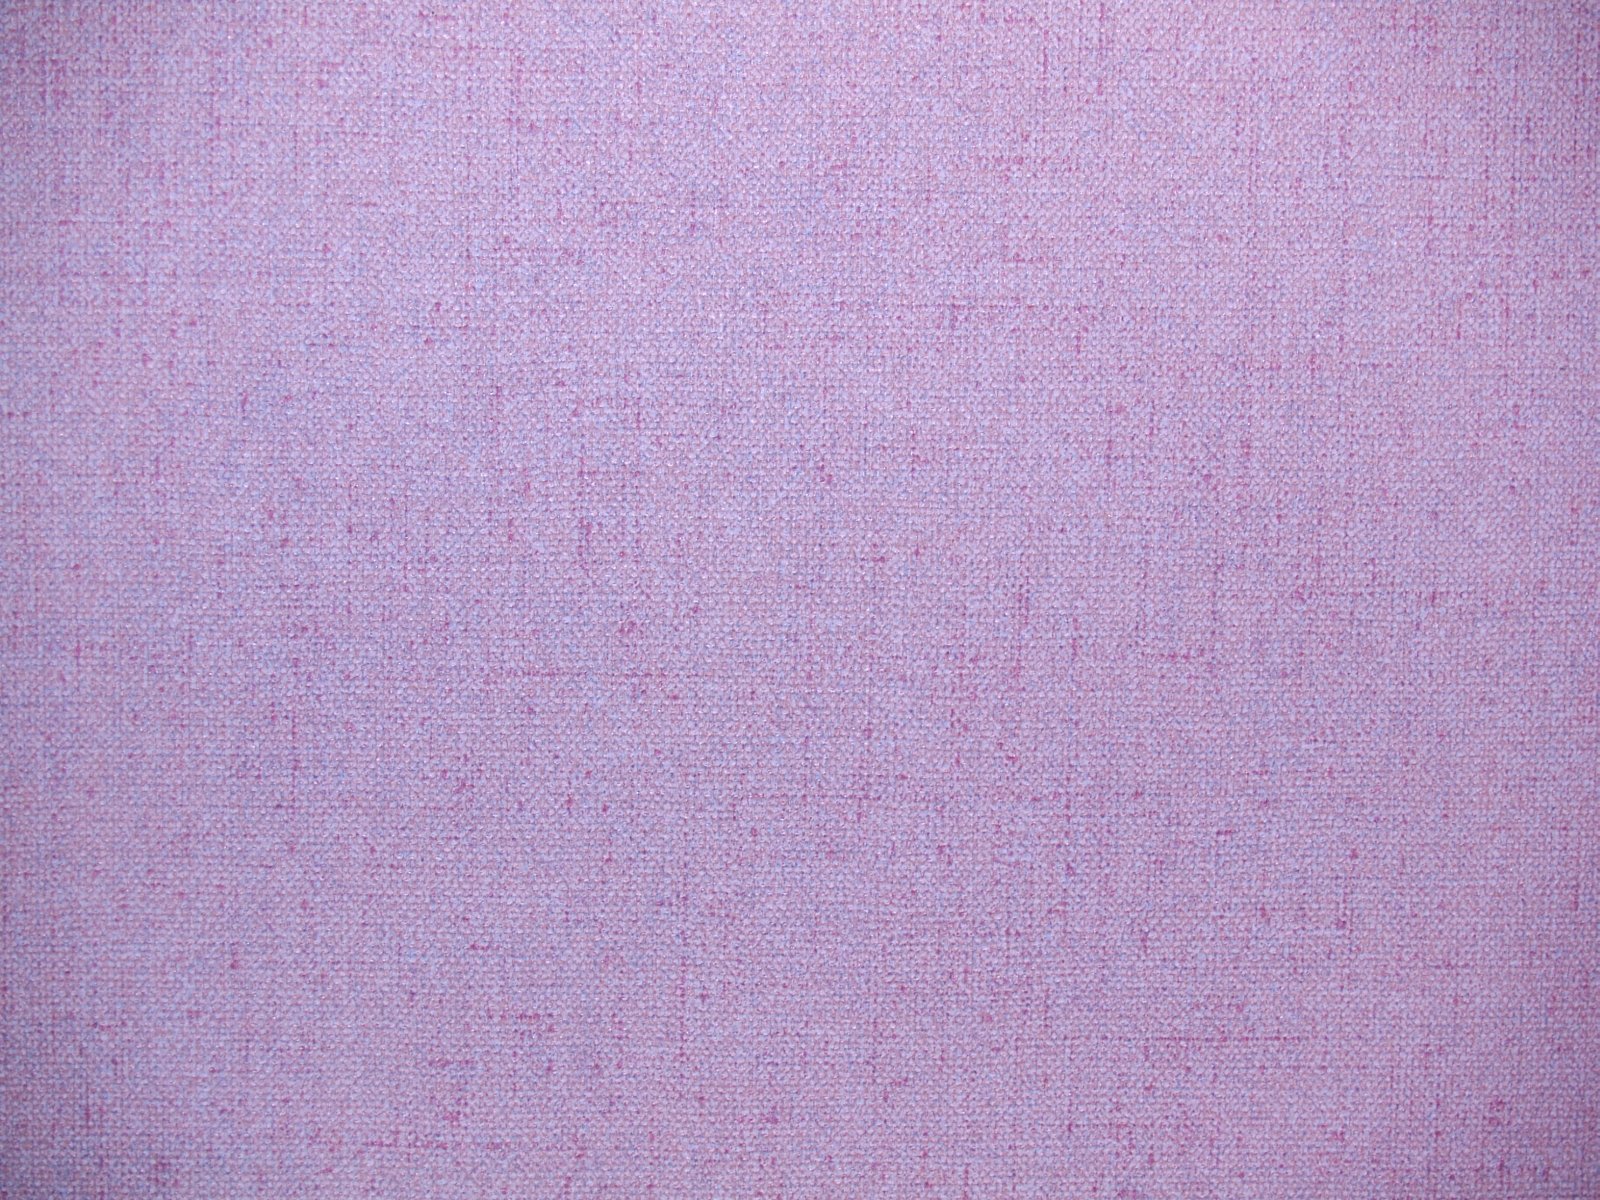 light pink cloth textured with small white dots